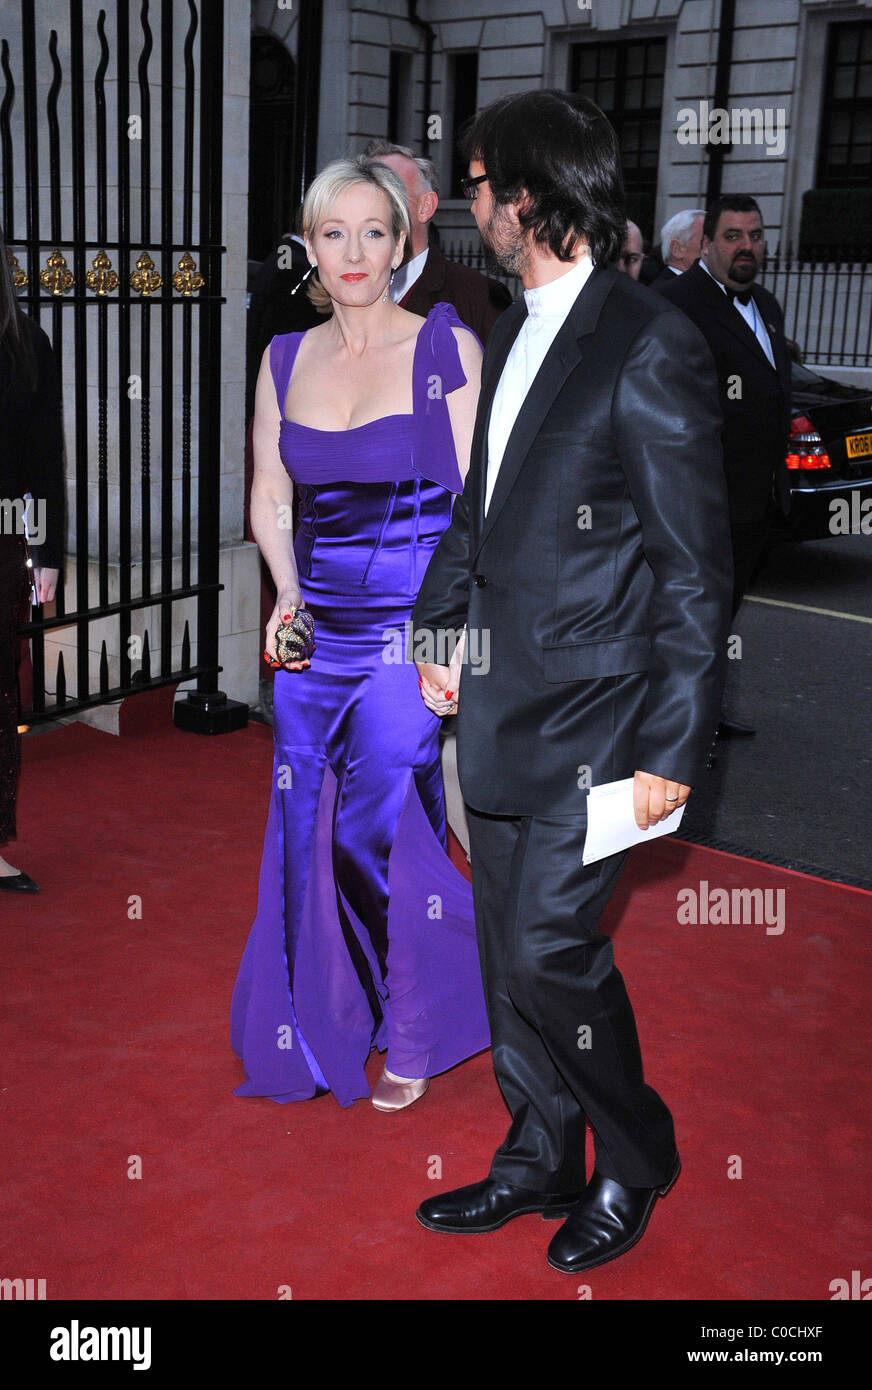 J. K. Rowling and husband Neil Murray Galaxy British Book Awards held at the Grosvenor House - Arrivals London, England - Stock Photo